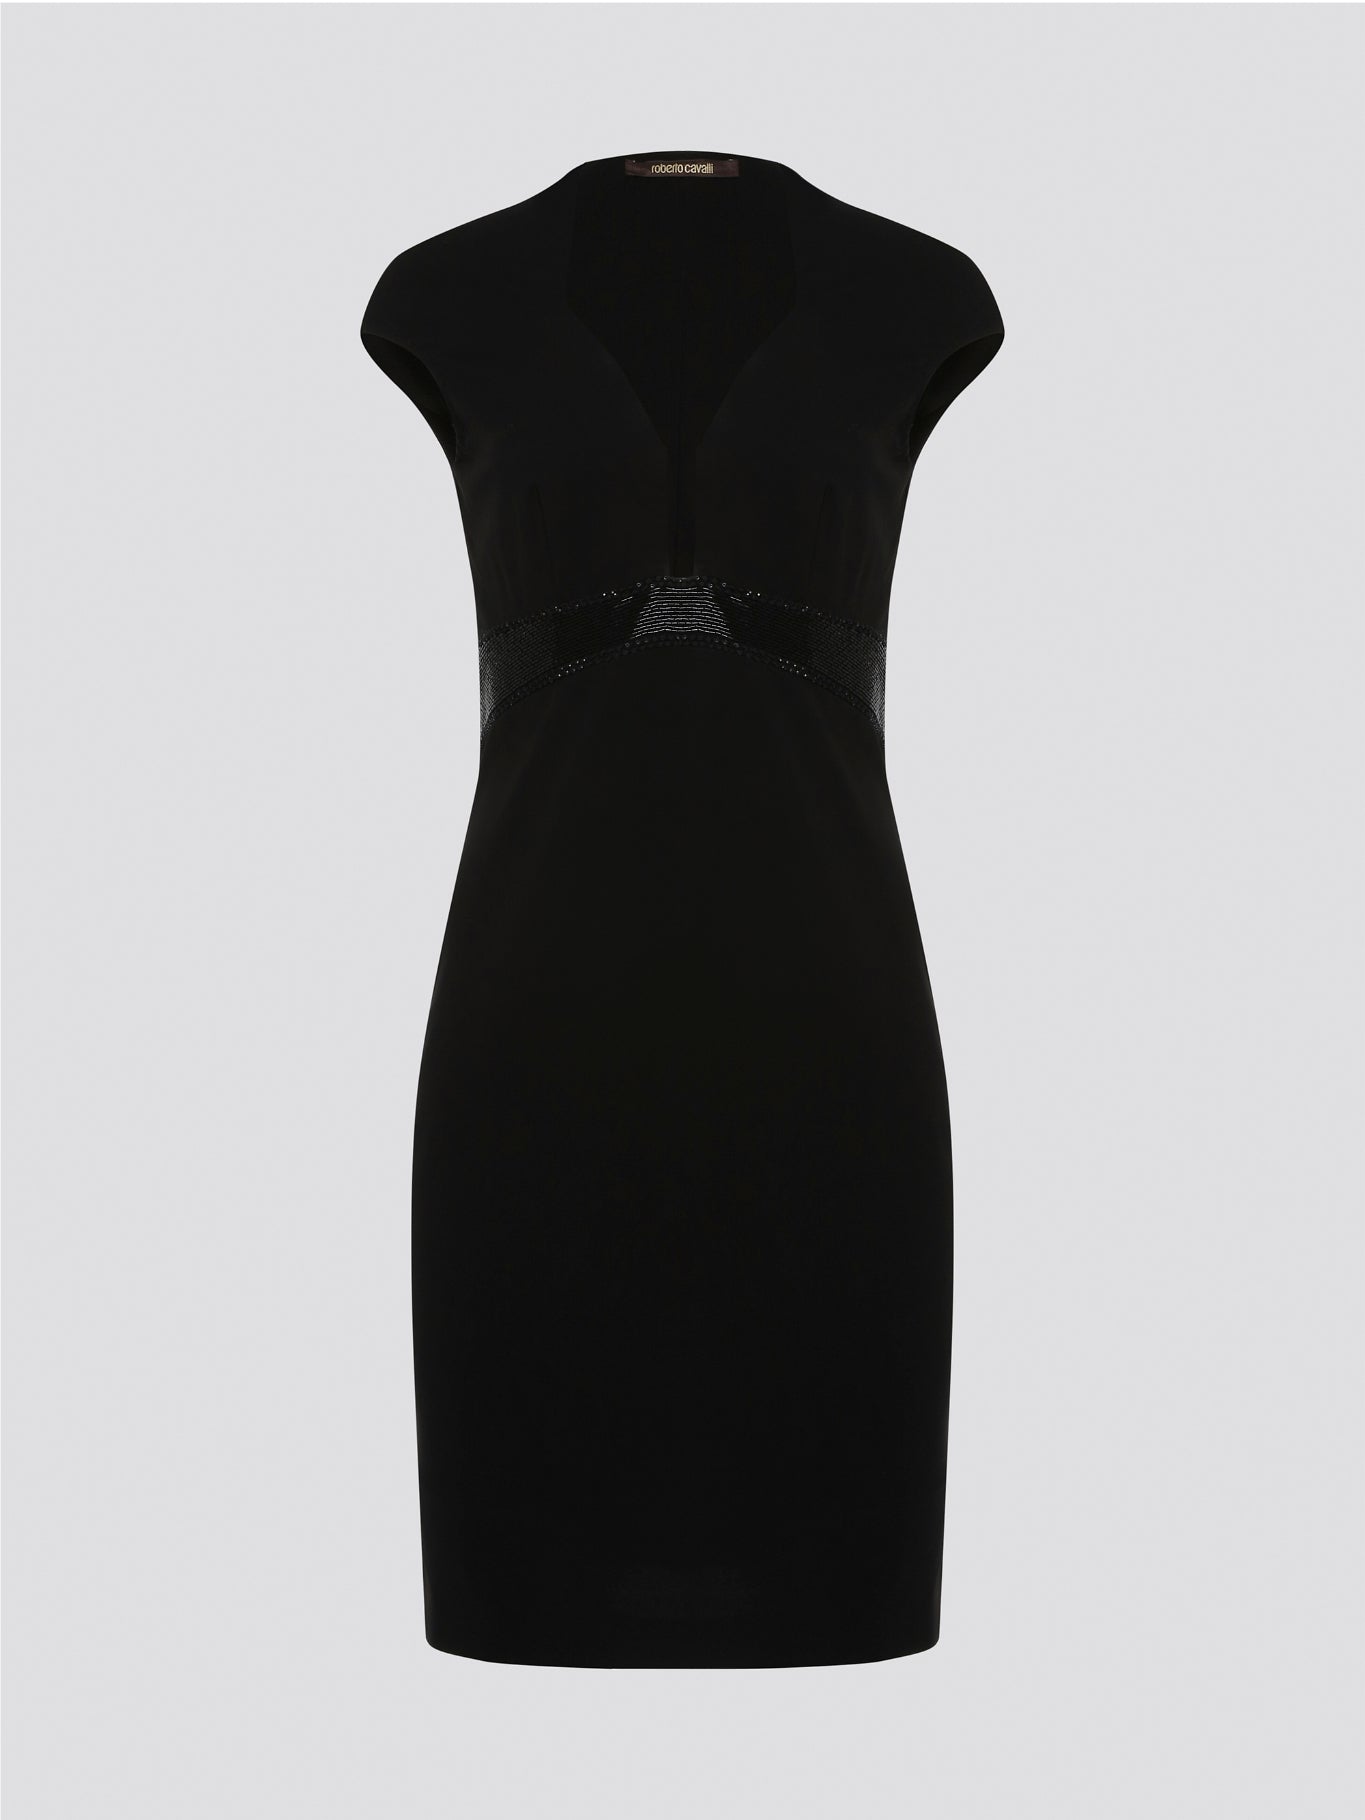 Step into the spotlight and command attention in this stunning Black Embellished Bodycon Dress from Roberto Cavalli. The intricate embellishments and figure-hugging silhouette will have all eyes on you, making you stand out from the crowd at any event. Elevate your wardrobe with this luxurious and unique piece that exudes glamour and confidence.